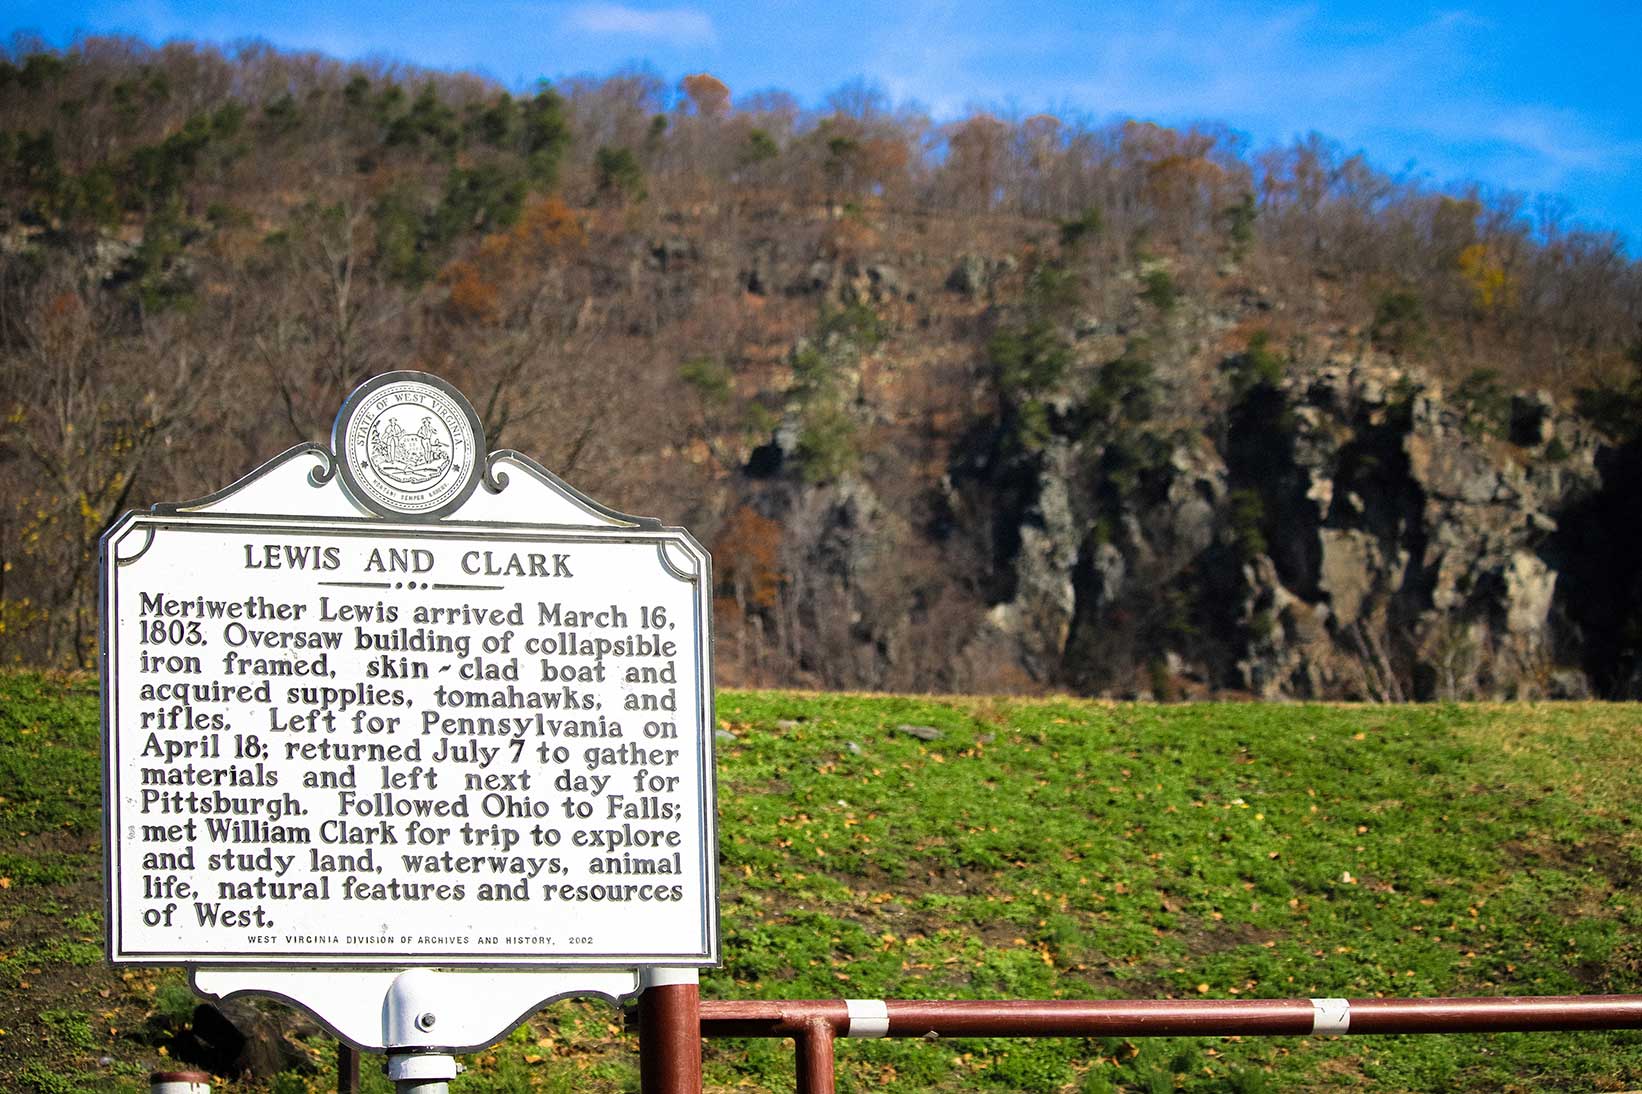 Lewis & Clark historical marker with mountains in background in Harper's Ferry, WV